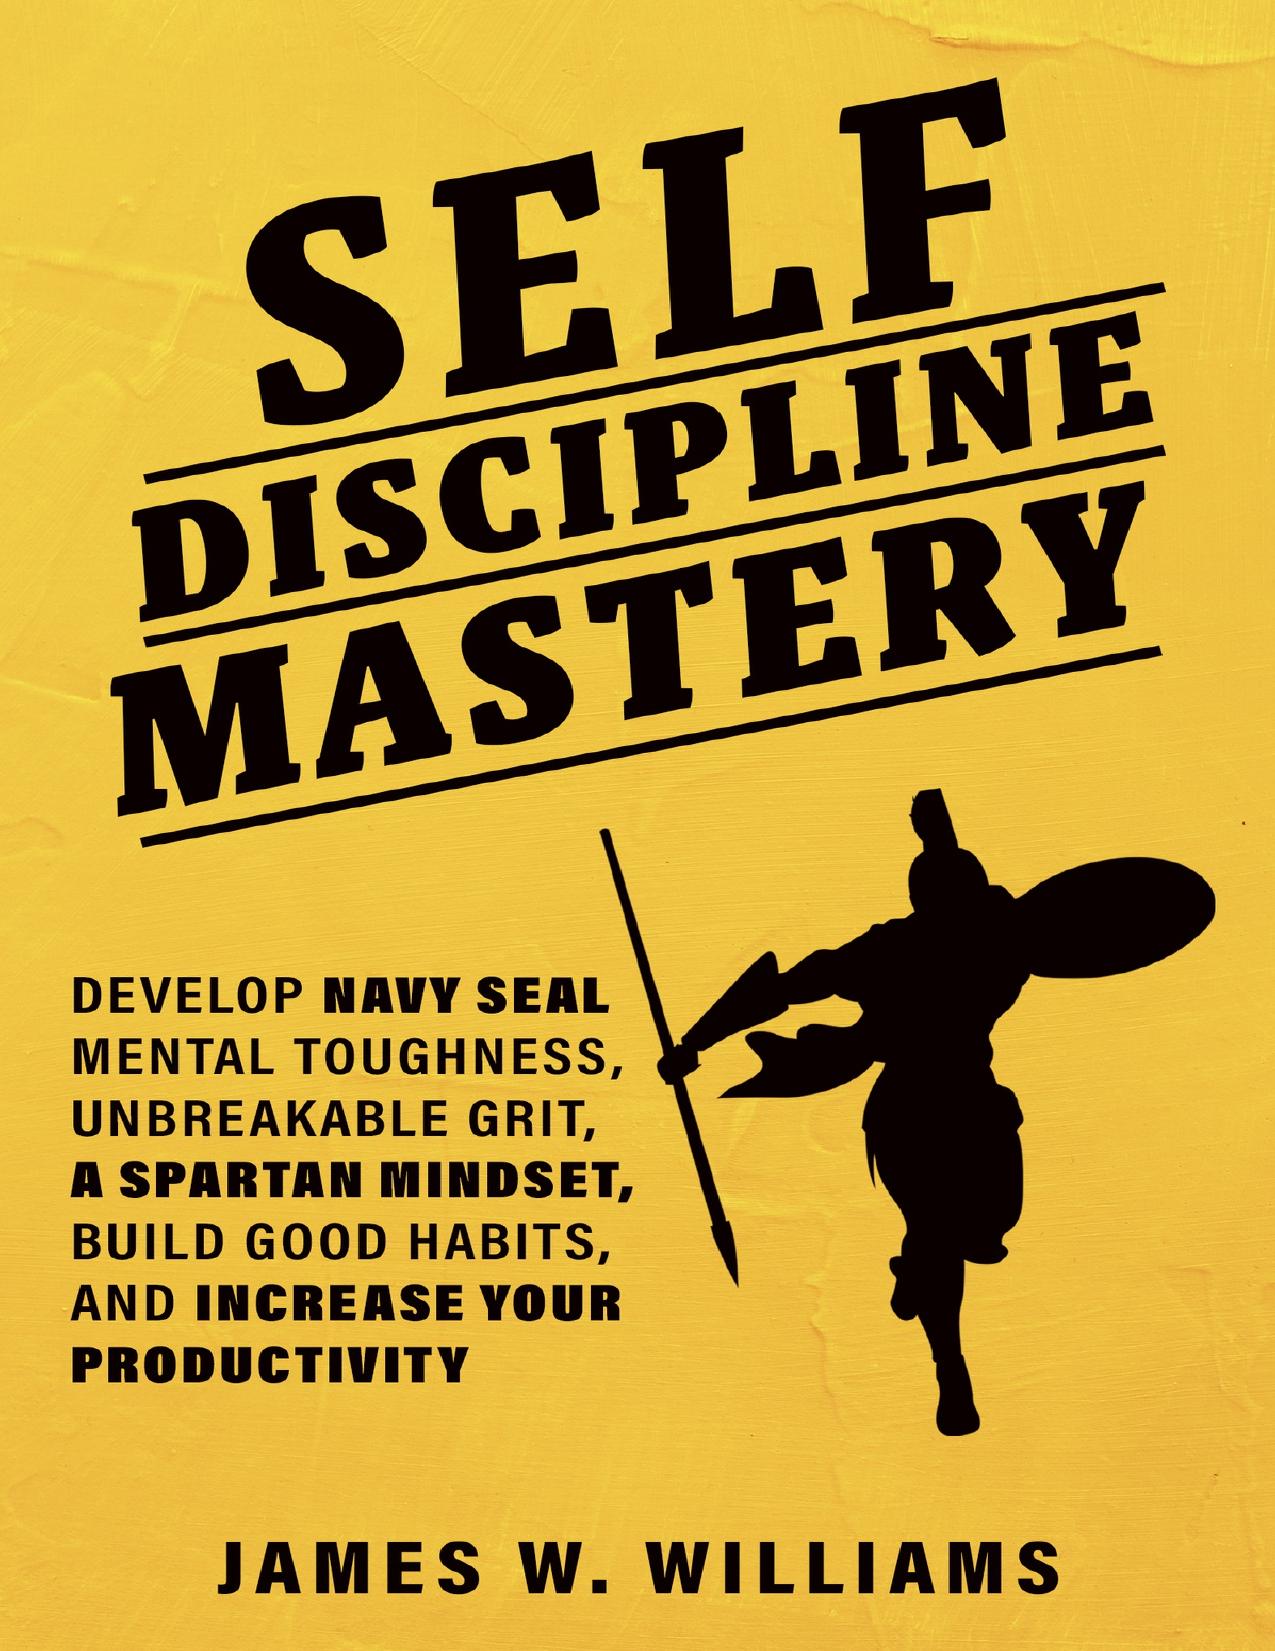 Self-discipline Mastery: Develop Navy Seal Mental Toughness, Unbreakable Grit, Spartan Mindset, Build Good Habits, and Increase Your Productivity (Practical Emotional Intelligence Book 7) by W. Williams James